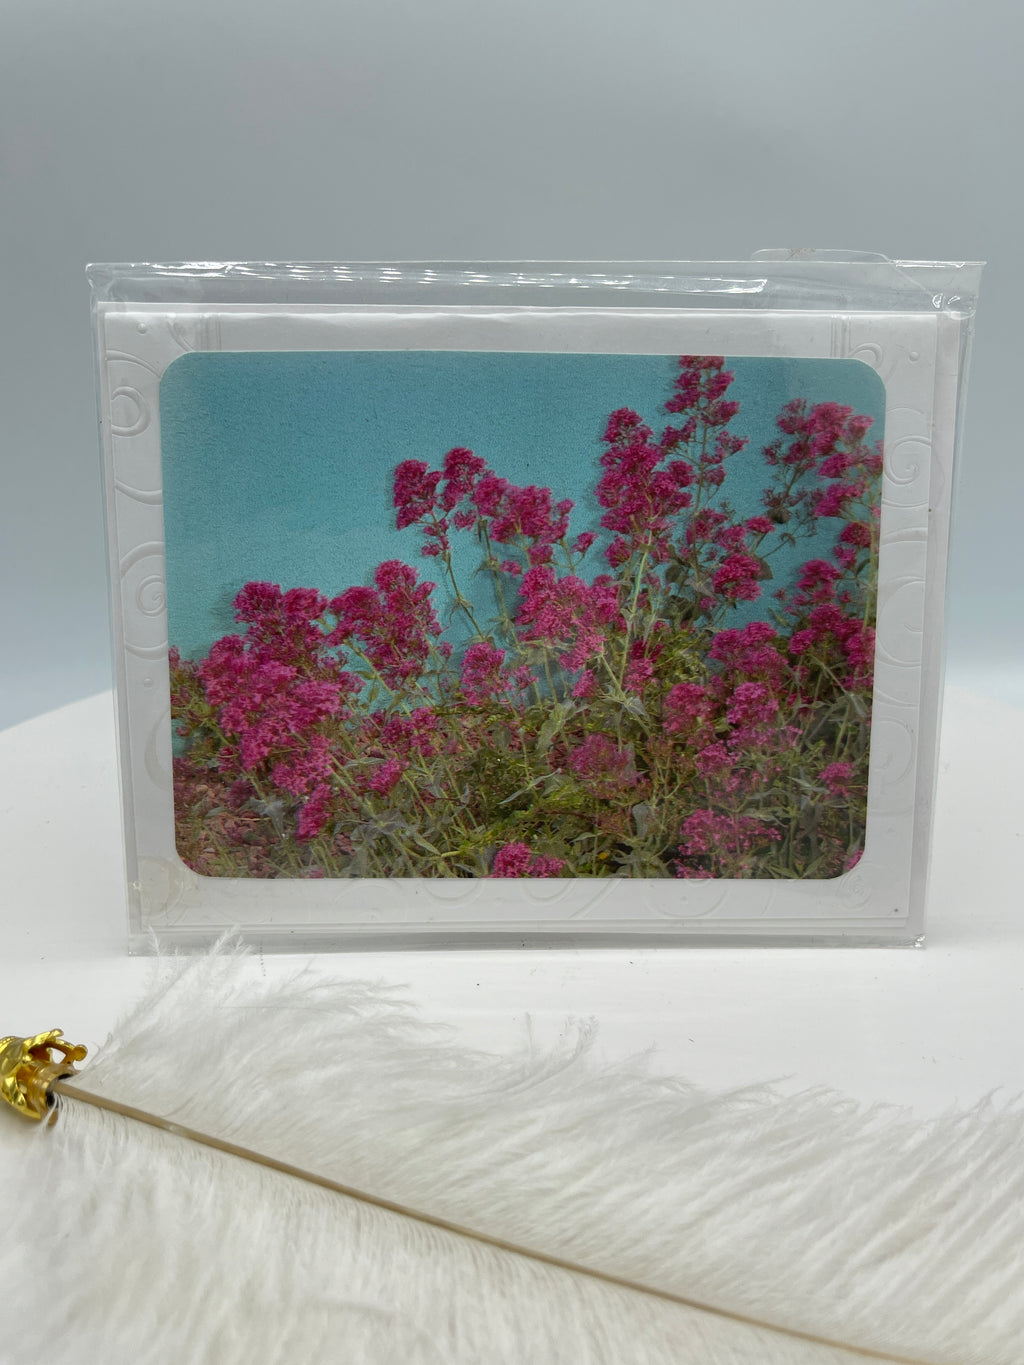 Red Valerian on Turquoise Wall